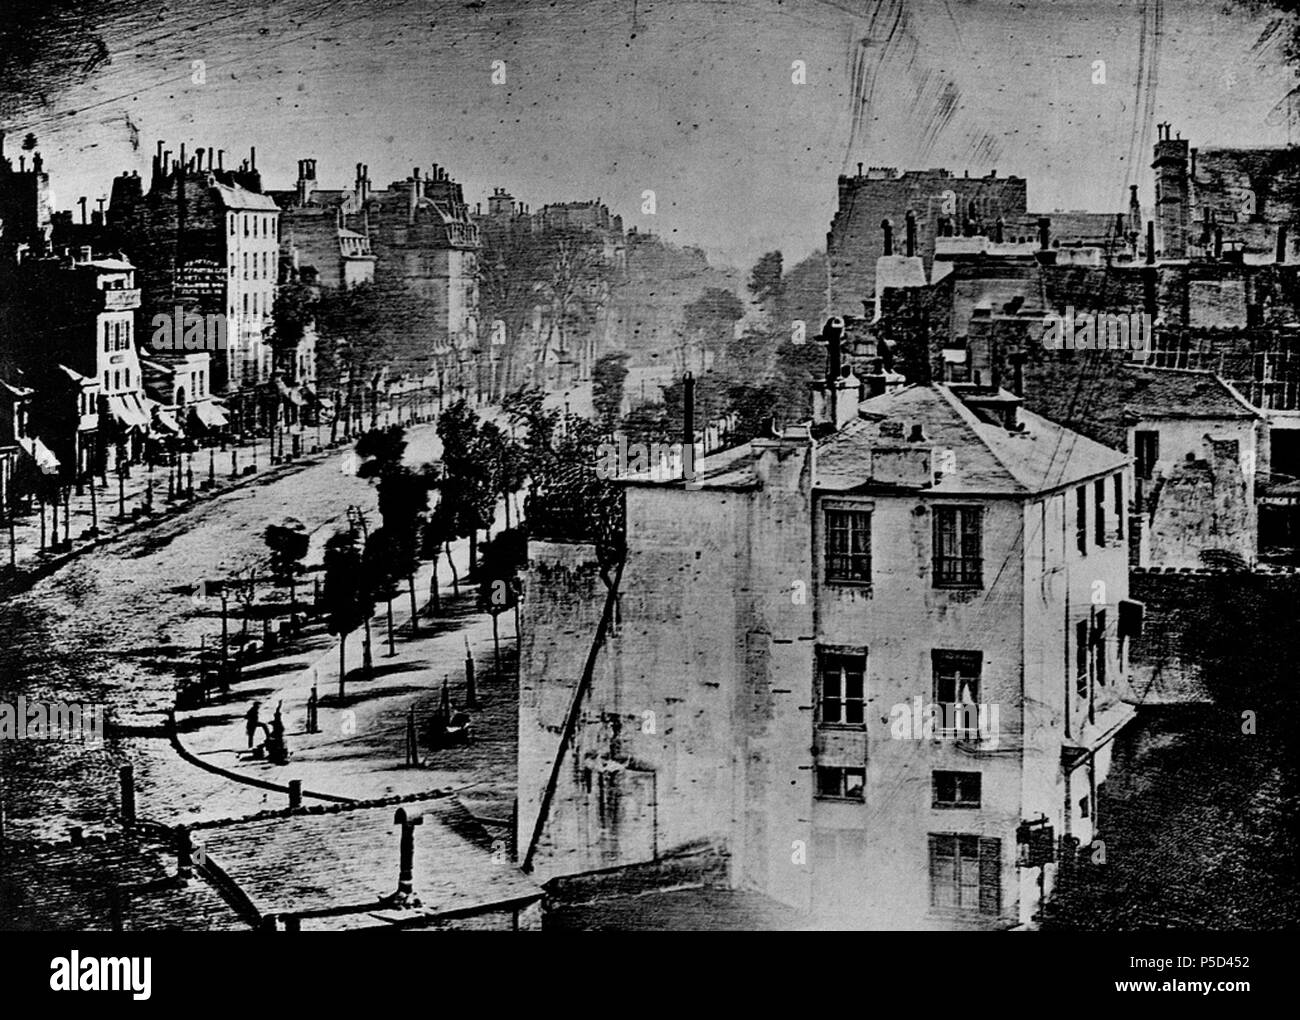 N/A. English: This is 'Boulevard du Temple', the first ever photograph of a person. The photo was taken by Louis Daguerre in late 1838 or early 1839 in Paris. It is of a busy street, but because exposure time was over ten minutes, the city traffic was moving too much to appear. The exception is a man in the bottom left corner, who stood still getting his boots polished long enough to show. Türkçe: Boulevard du Temple adl bu çalma, bir insana ait bilinen ilk fotoraftr. Louis Daguerre tarafndan 1838 sonu ya da 1839 banda Paris'te çekilmitir. Konu kalabalk bir caddedir ancak pozlama süresi 10 dak Stock Photo